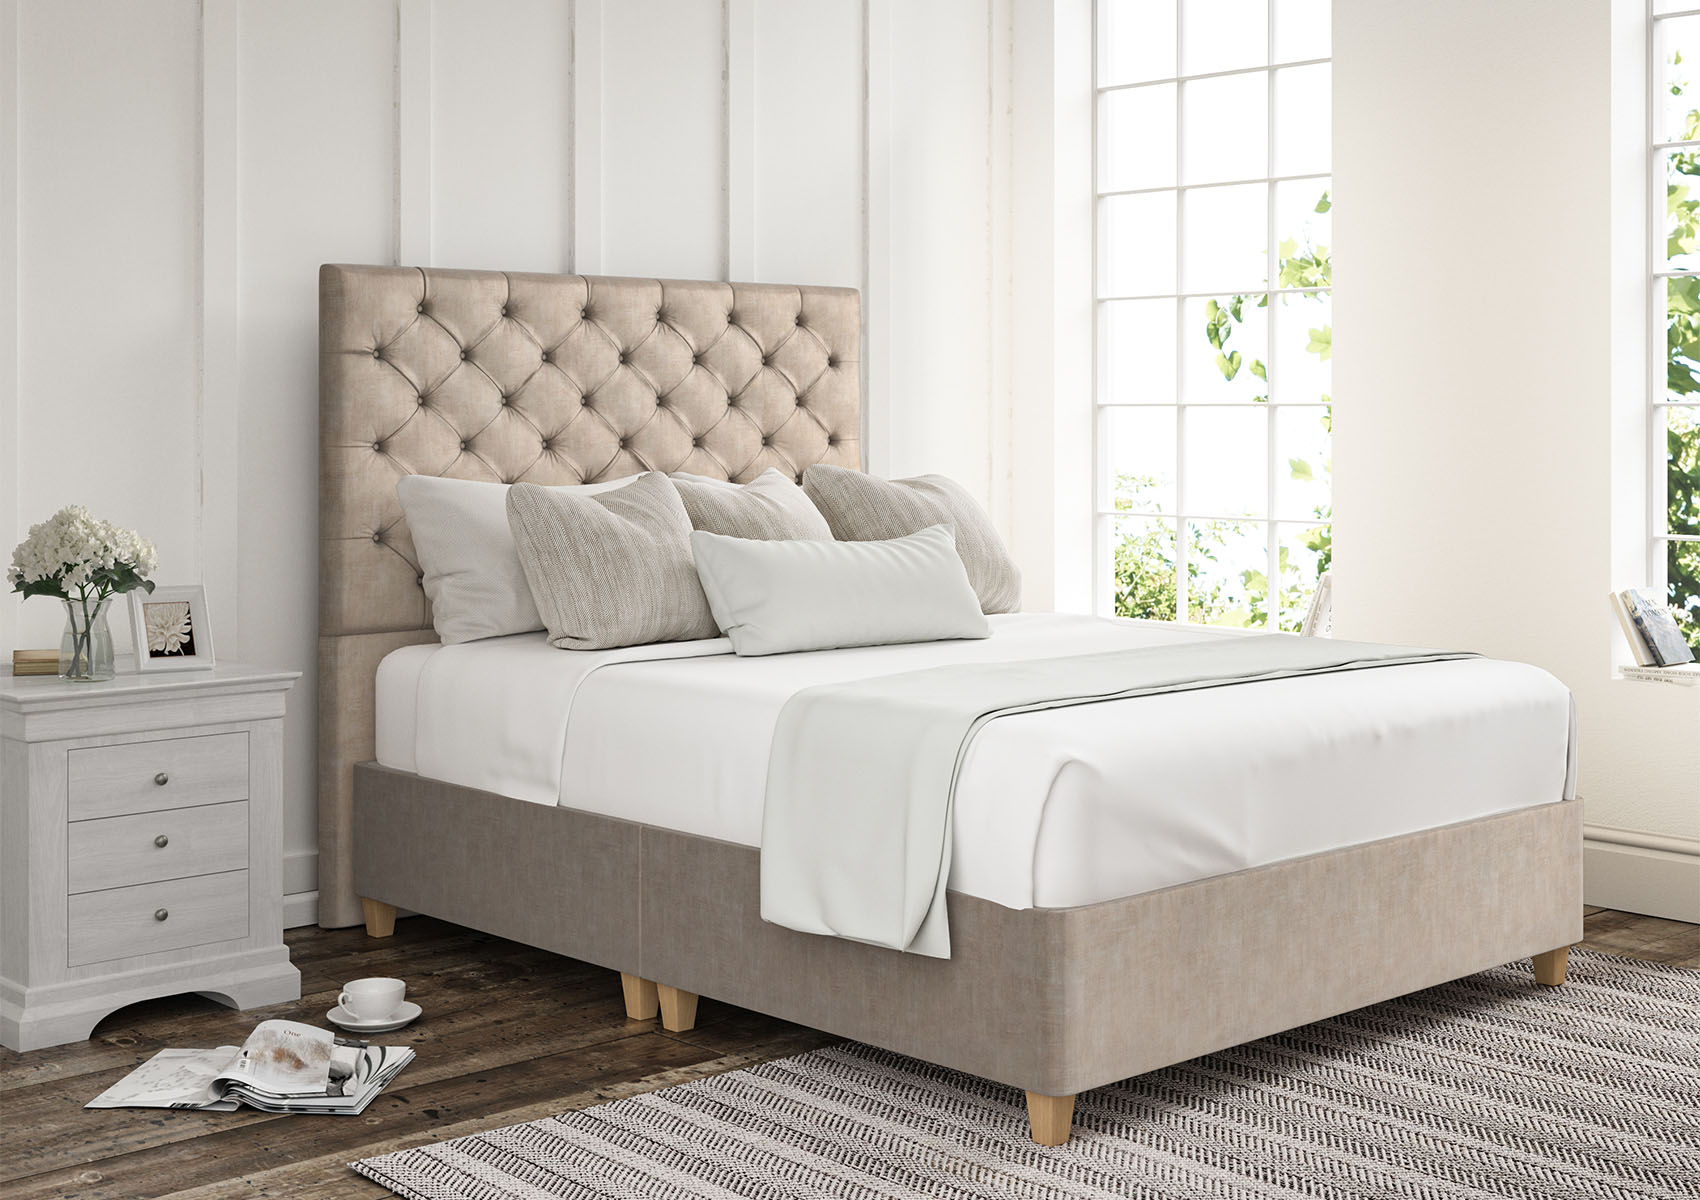 View Chesterfield Heritage Royal Upholstered Super King Divan Bed Time4Sleep information